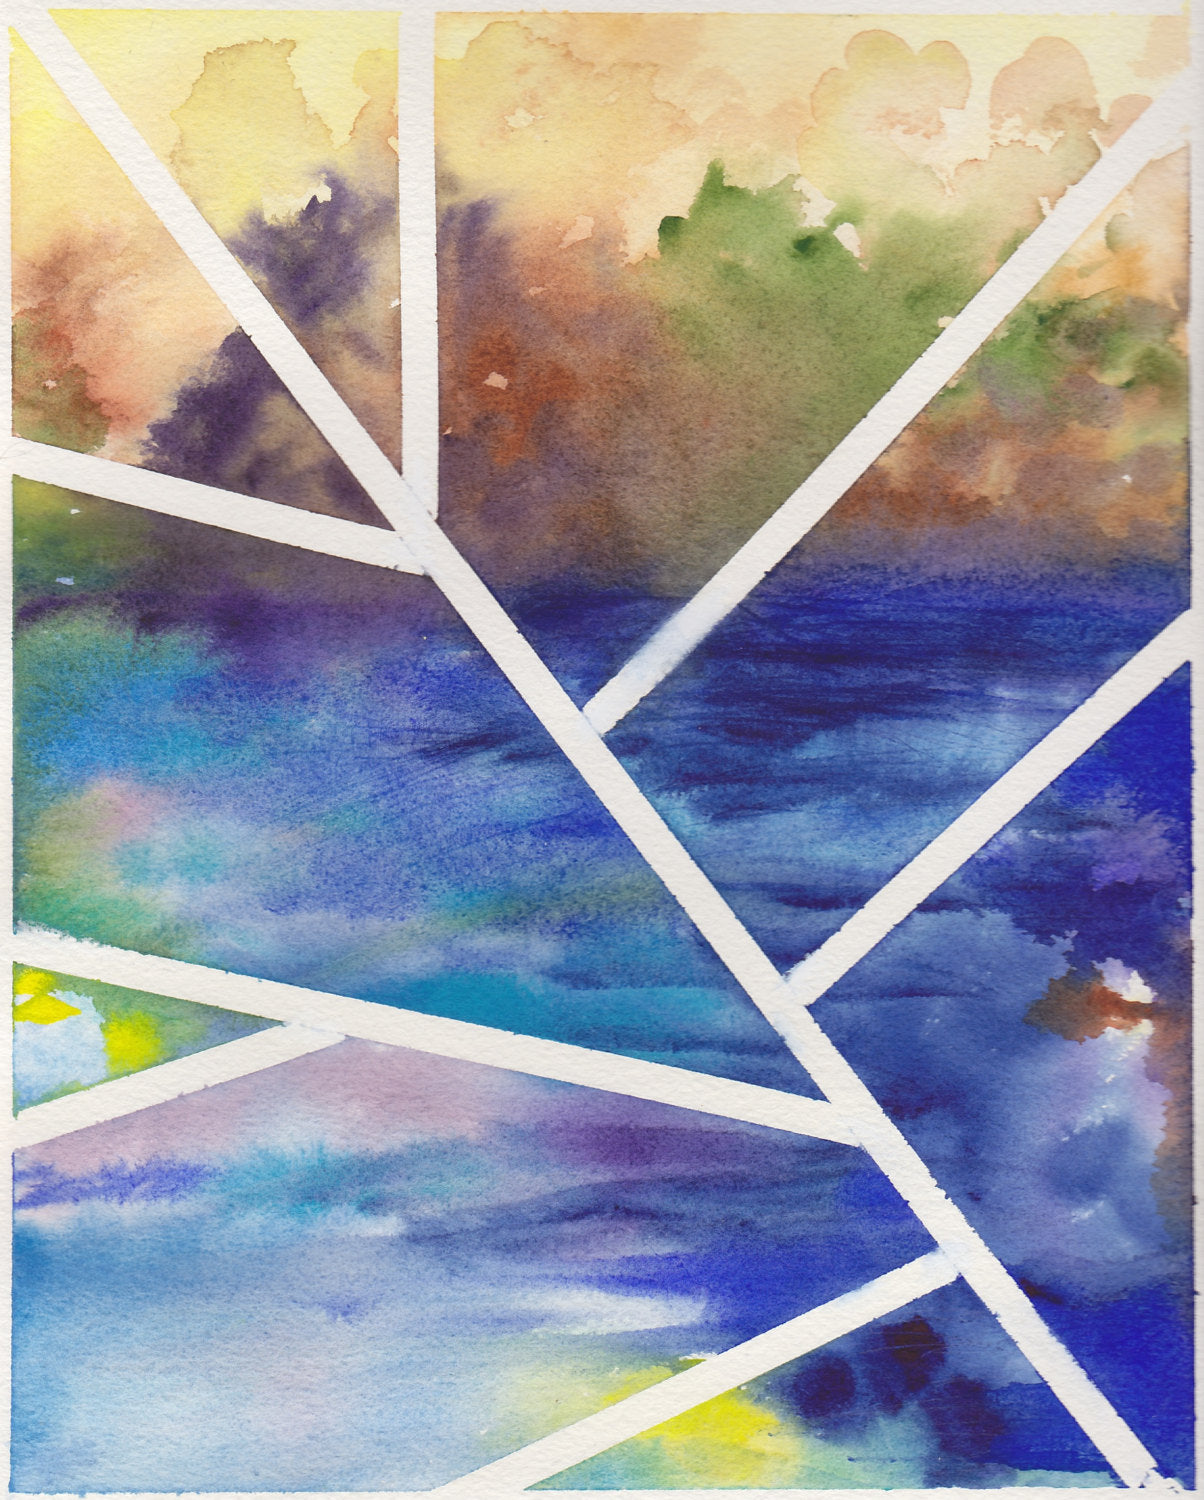 Original contemporary watercolor painting, 8x10, abstract landscape - "Lines Over Cool Blue"